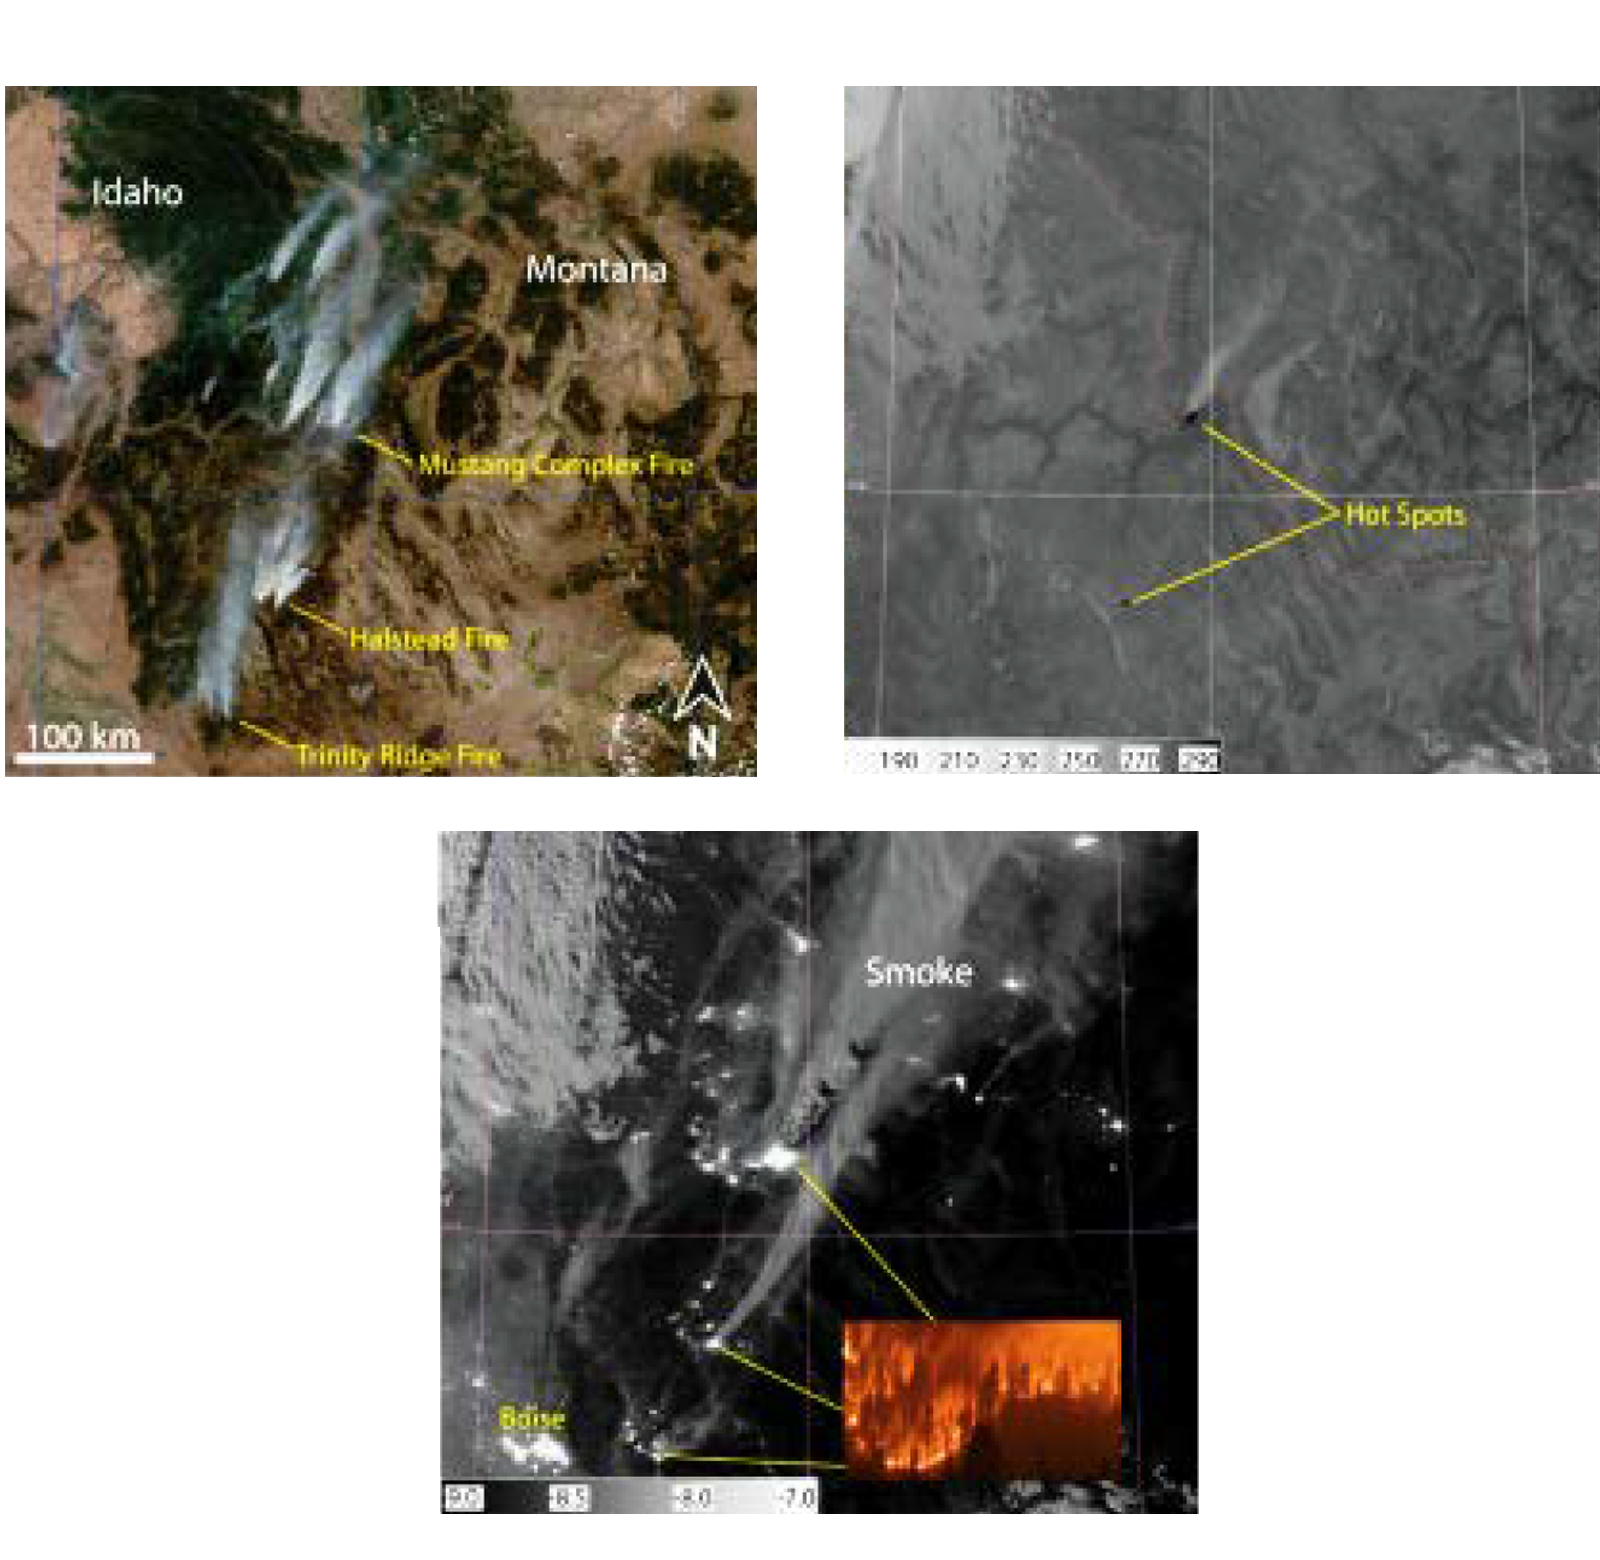 A composite of three images of fires in Idaho in 2012. The top left is a true color image showing smoke drifting over the state. At the right, an infrared image shows hot spots in black and white. The bottom image shows the light of the fires at night.